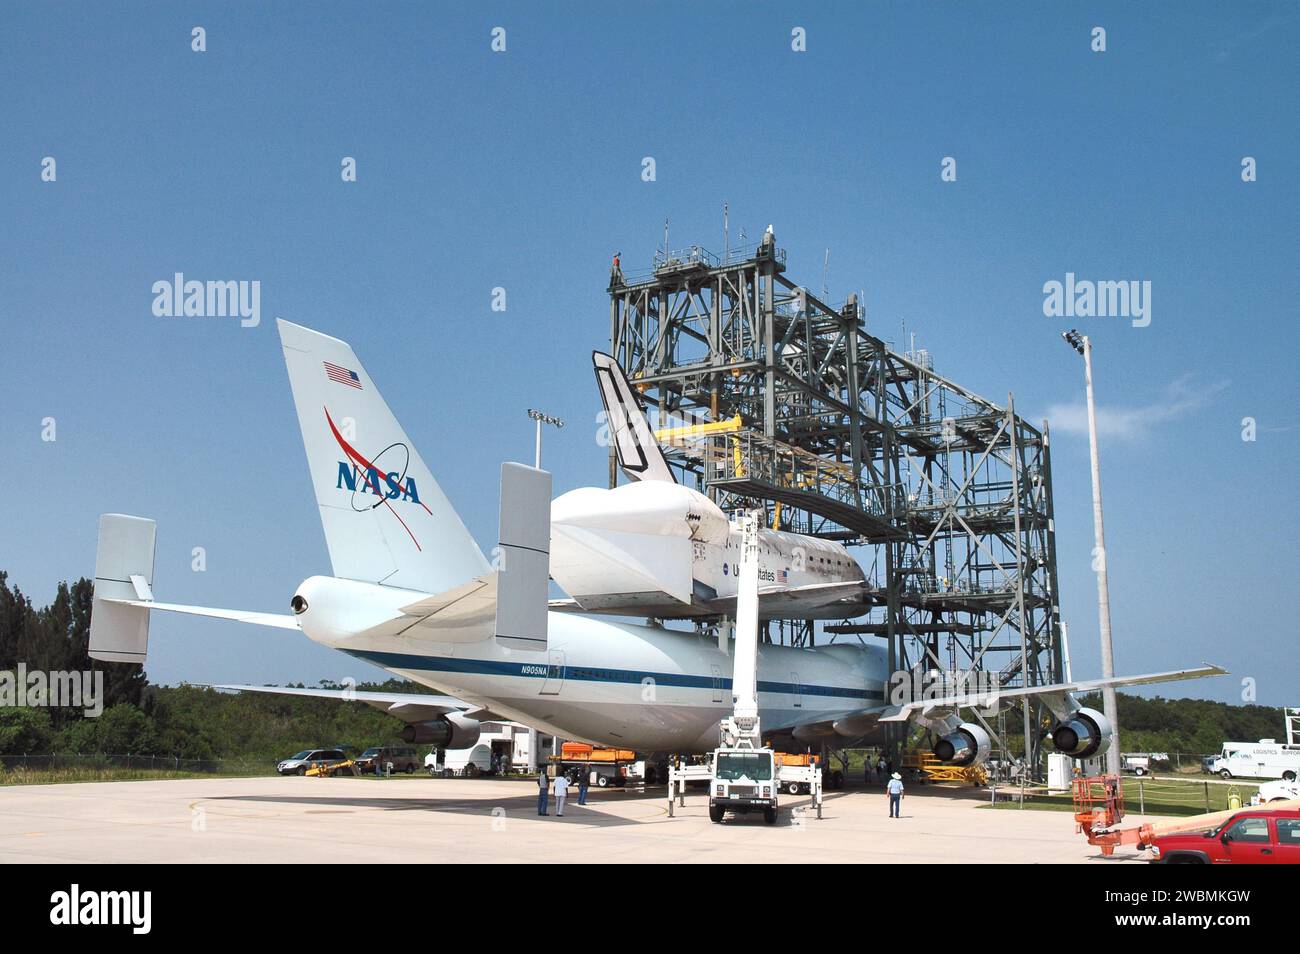 KENNEDY SPACE CENTER, FLA. - At NASA Kennedy Space Center’s Shuttle Landing Facility, the Shuttle Carrier Aircraft, a modified Boeing 747, and orbiter Discovery on top, remain in the mate demate device while Discovery is prepared for demating. Discovery was returned to Kennedy Space Center on a ferry flight from Edwards Air Force Base in California, where it landed Aug. 9 after 13 days in space on mission STS-114. In the mate demate device, a horizontal structure mounted at the 80-foot level between two towers controls and guides a large lift beam that attaches to the orbiter to raise and lowe Stock Photo